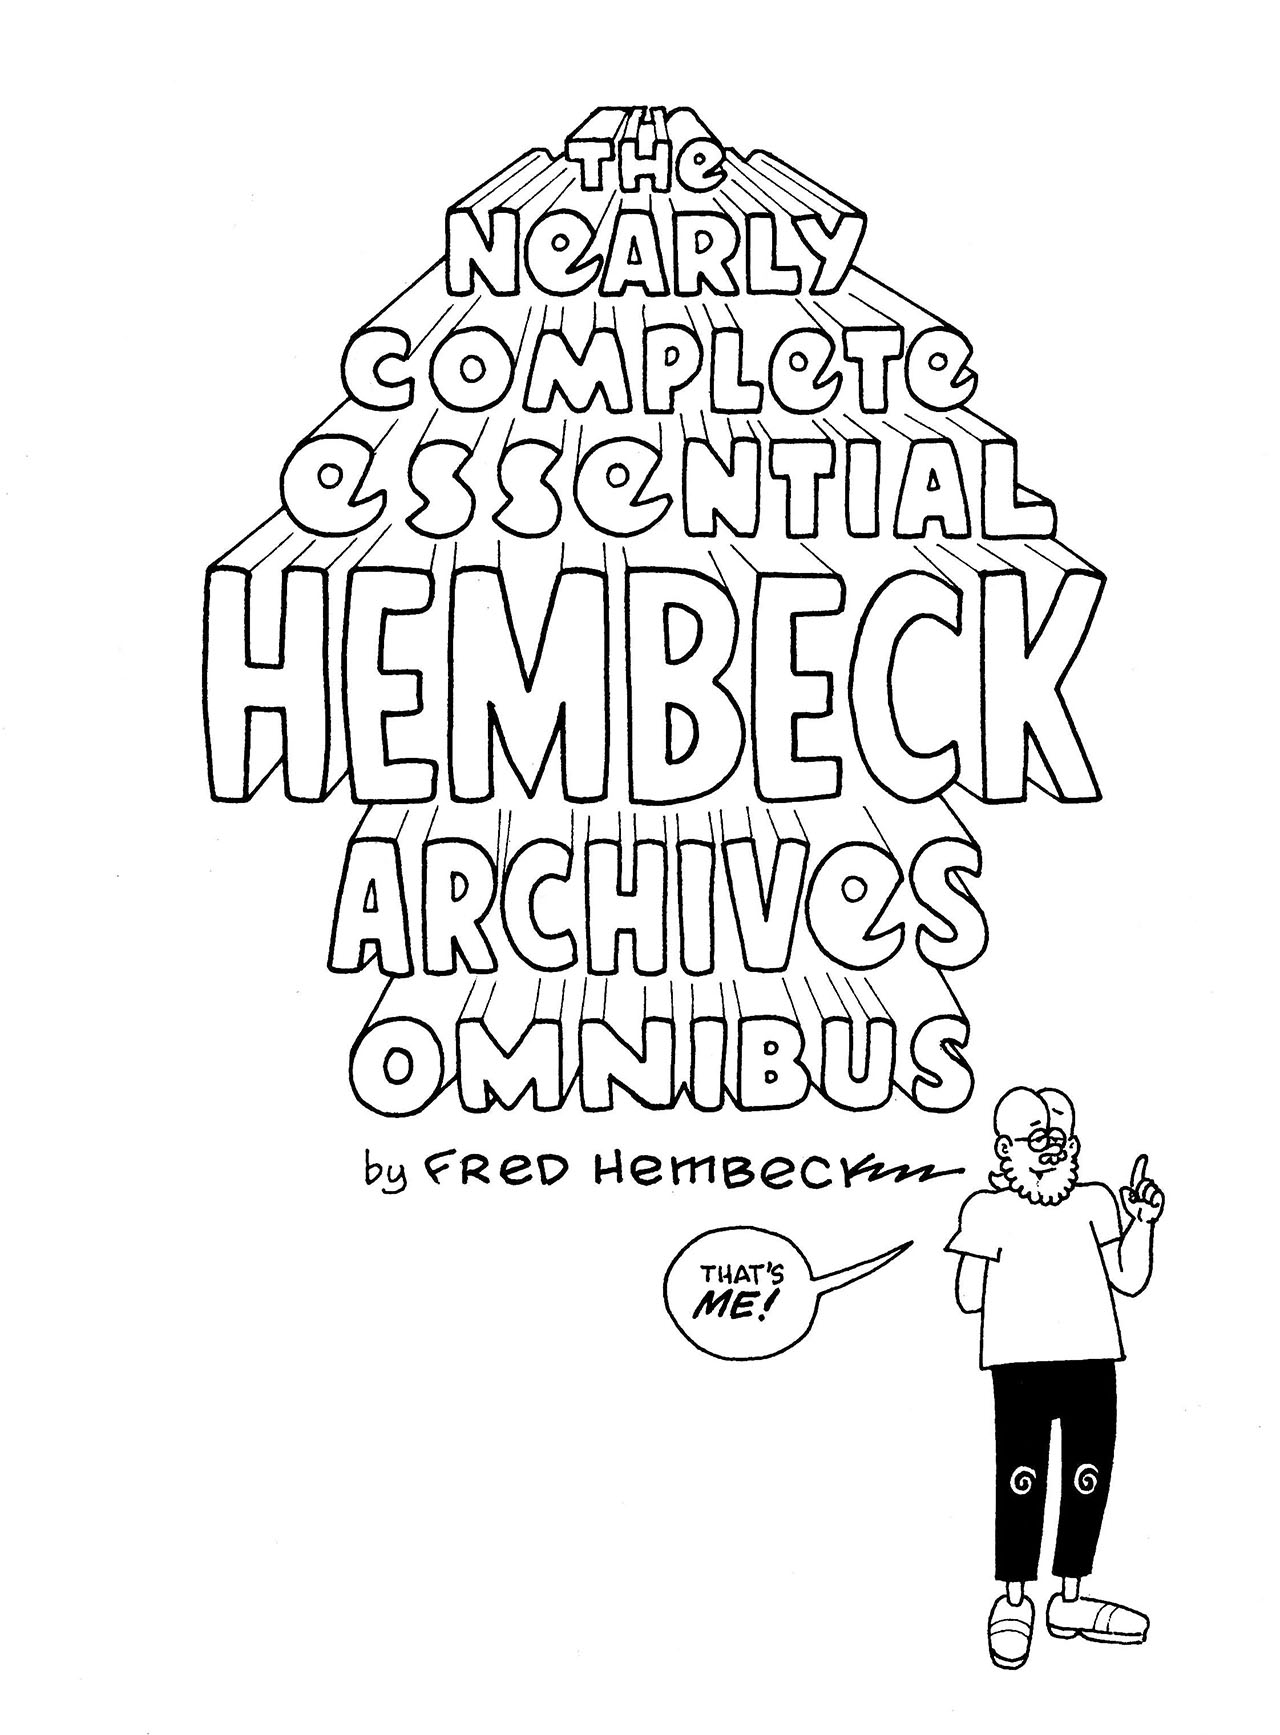 Read online The Nearly Complete Essential Hembeck Archives Omnibus comic -  Issue # TPB (Part 1) - 4